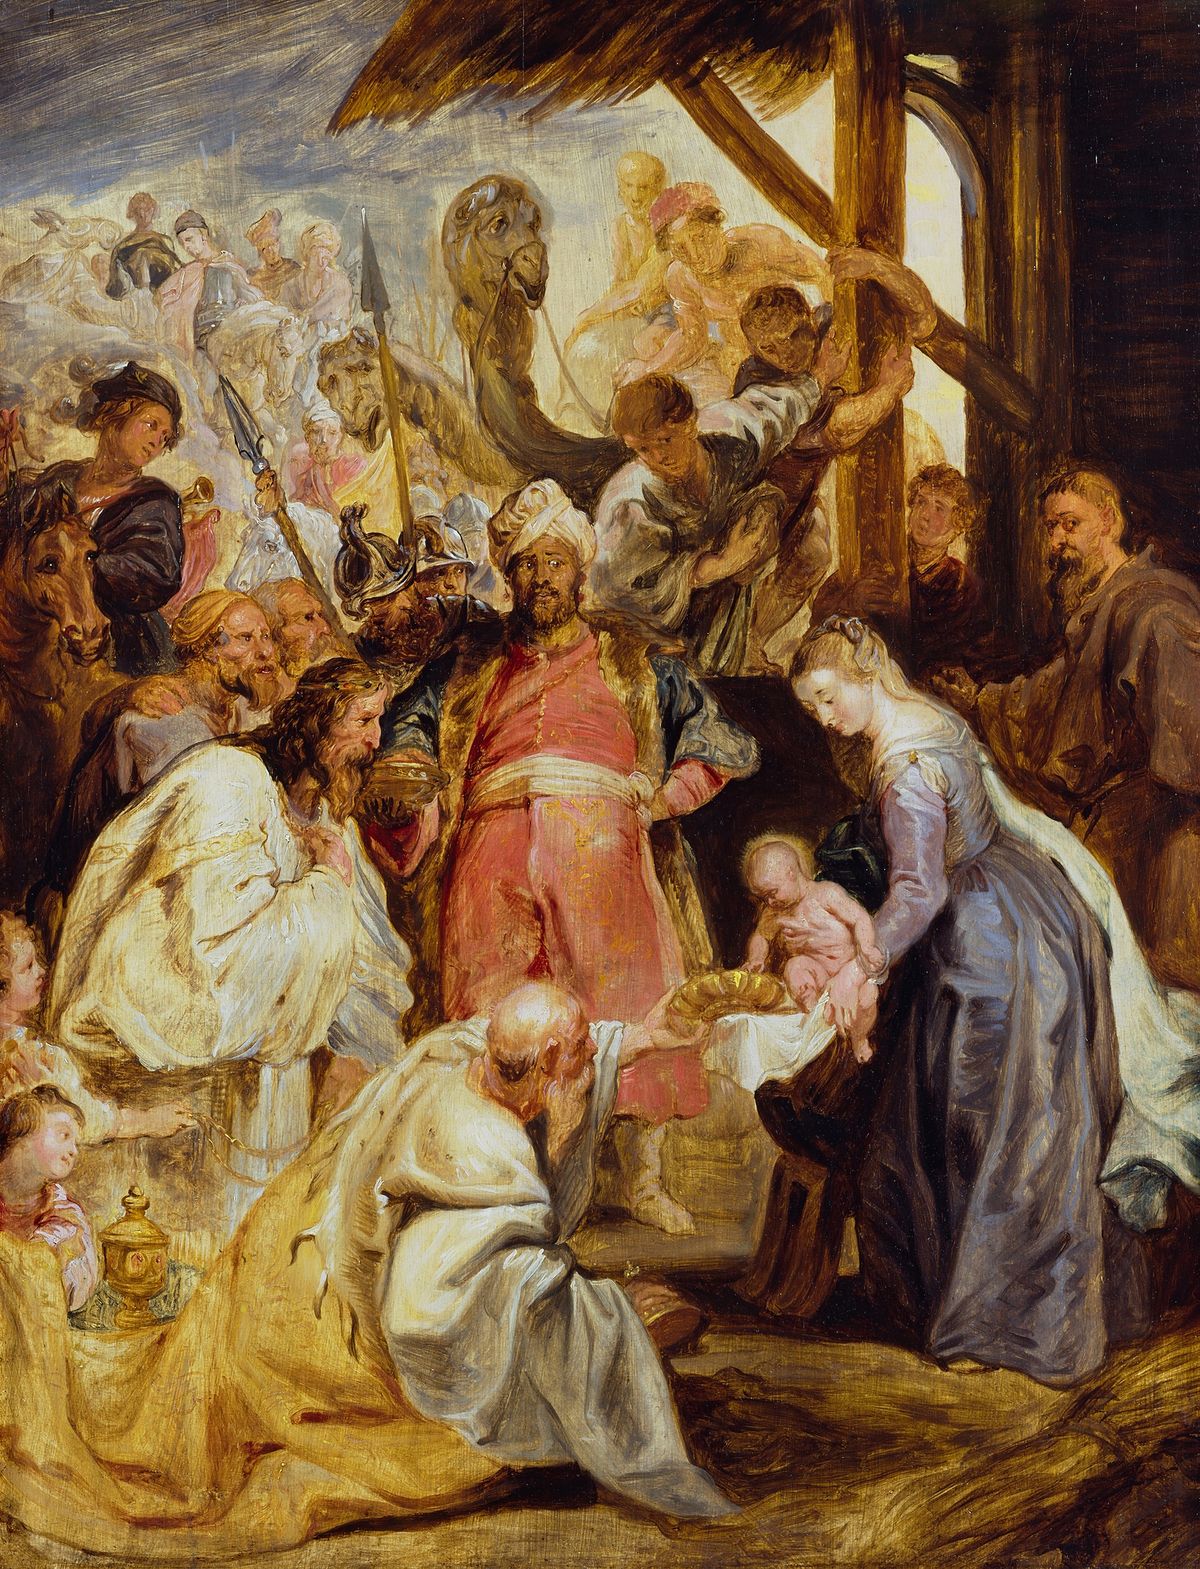 The Adoration of the Magi (c. 1624) by Peter Paul Rubens - Public Domain Catholic Painting